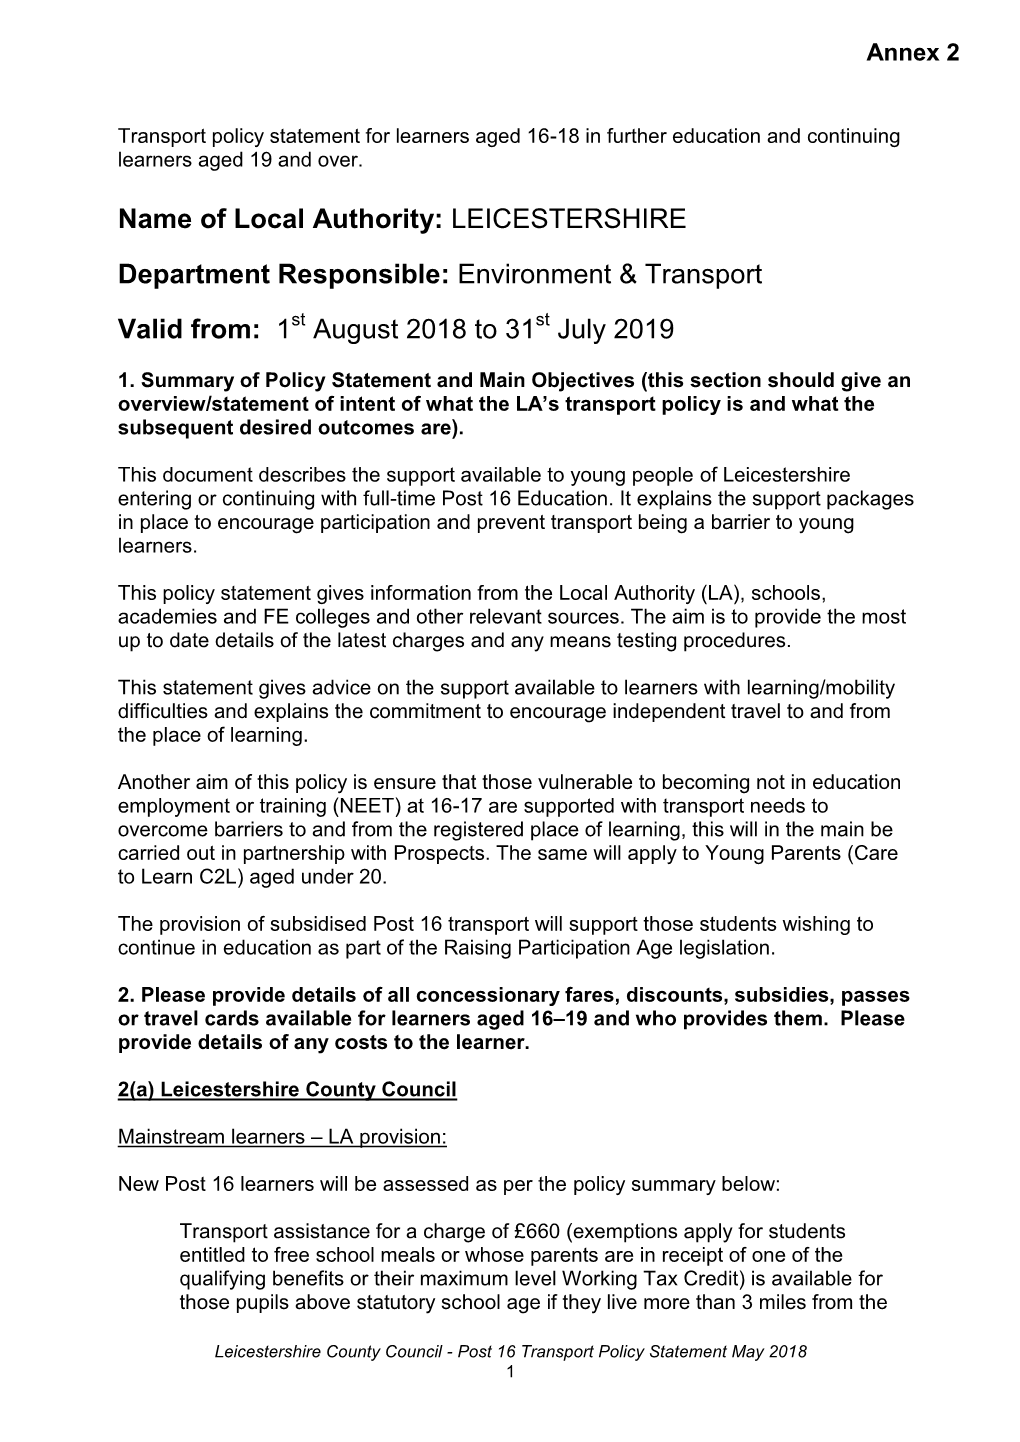 Transport Policy Statement for Learners Aged 16-18 in Further Education and Continuing Learners Aged 19 and Over